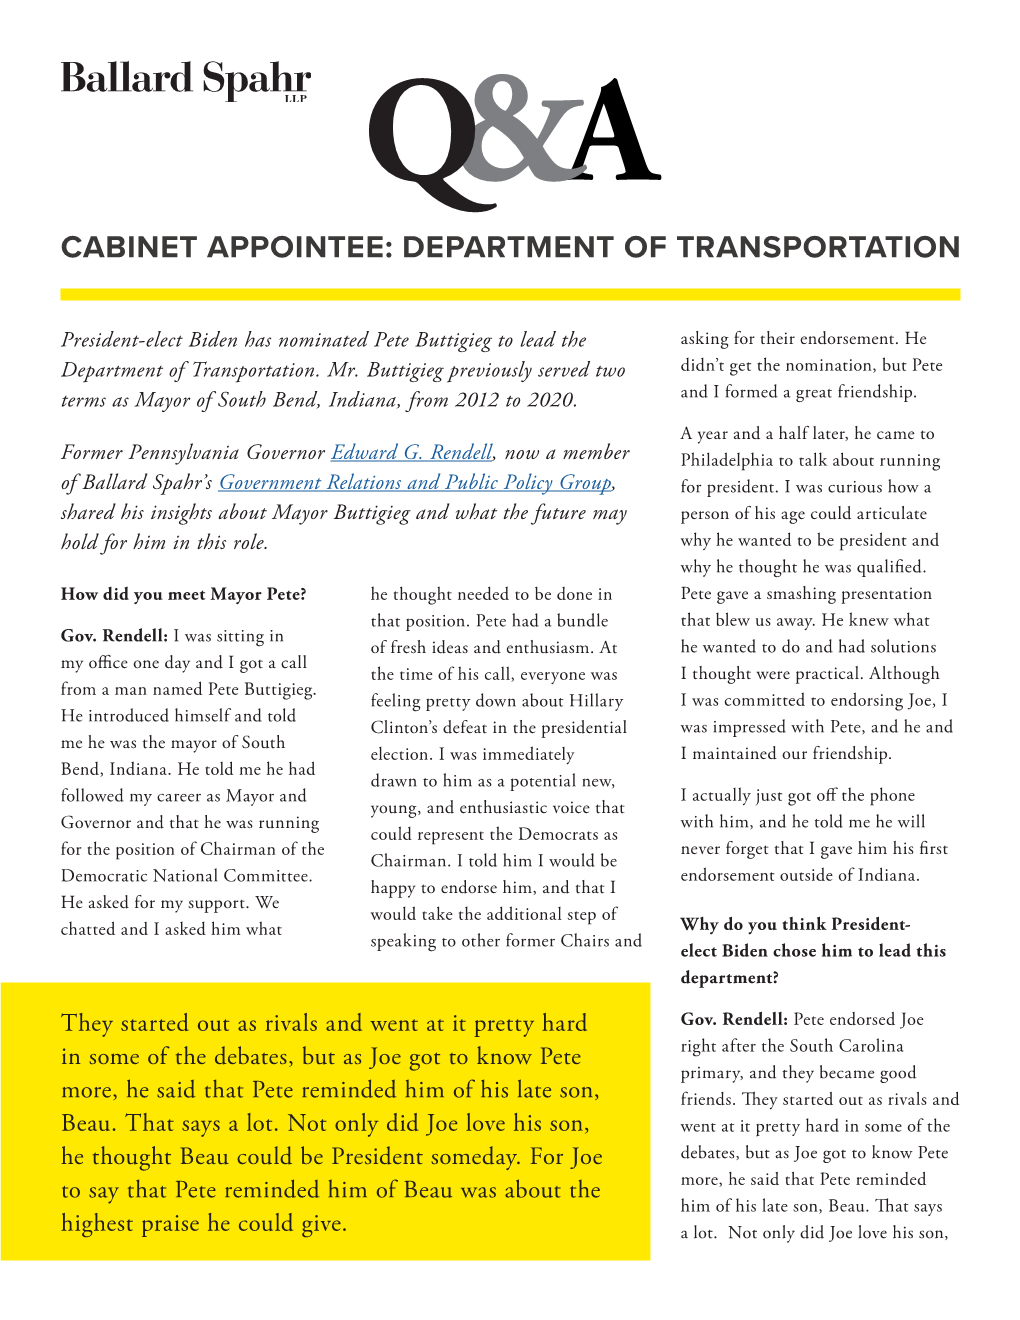 Cabinet Appointee: Department of Transportation